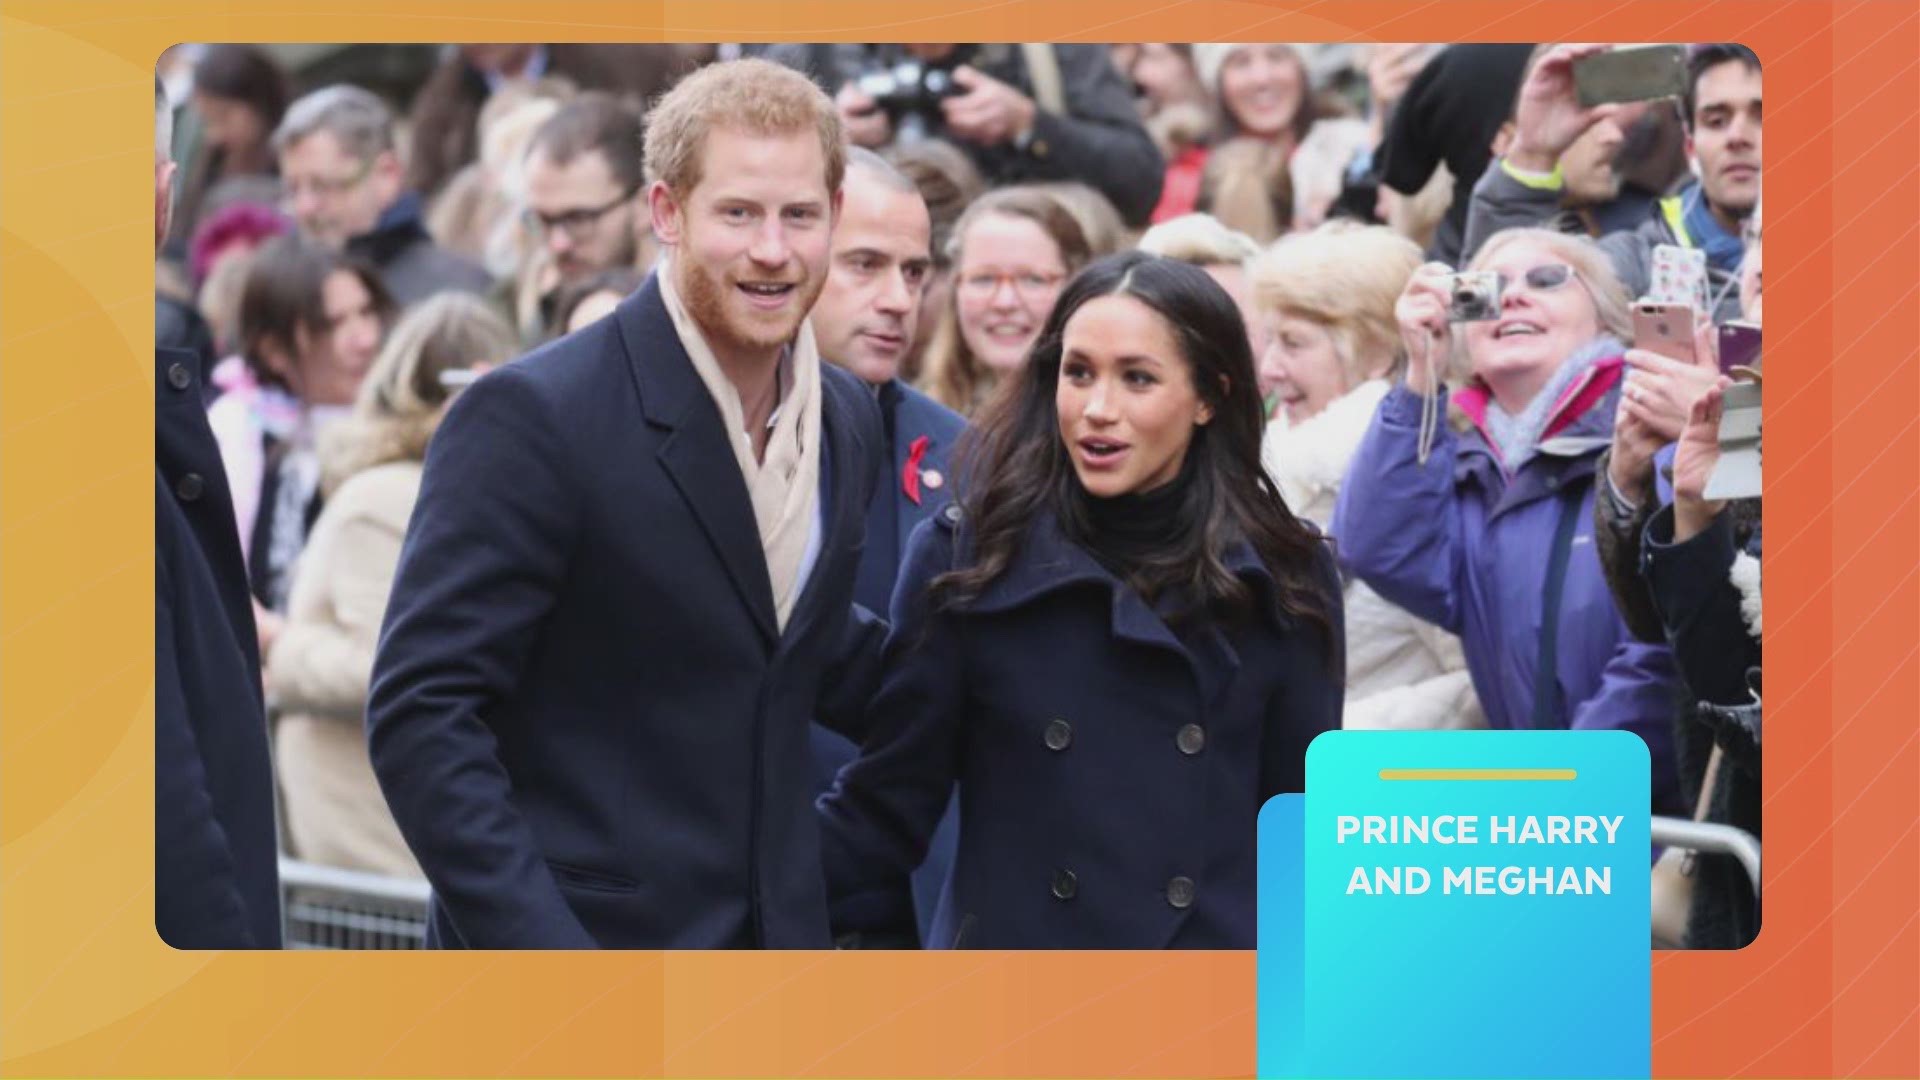 It's officially one month until the royal wedding on May 19th and Daily Blast LIVE co-host, Tory Shulman, is revealing all the royal secrets! From the surprise "Suits" trailer featuring Meghan's nuptials to who is next in-line for the throne, Daily Blast 